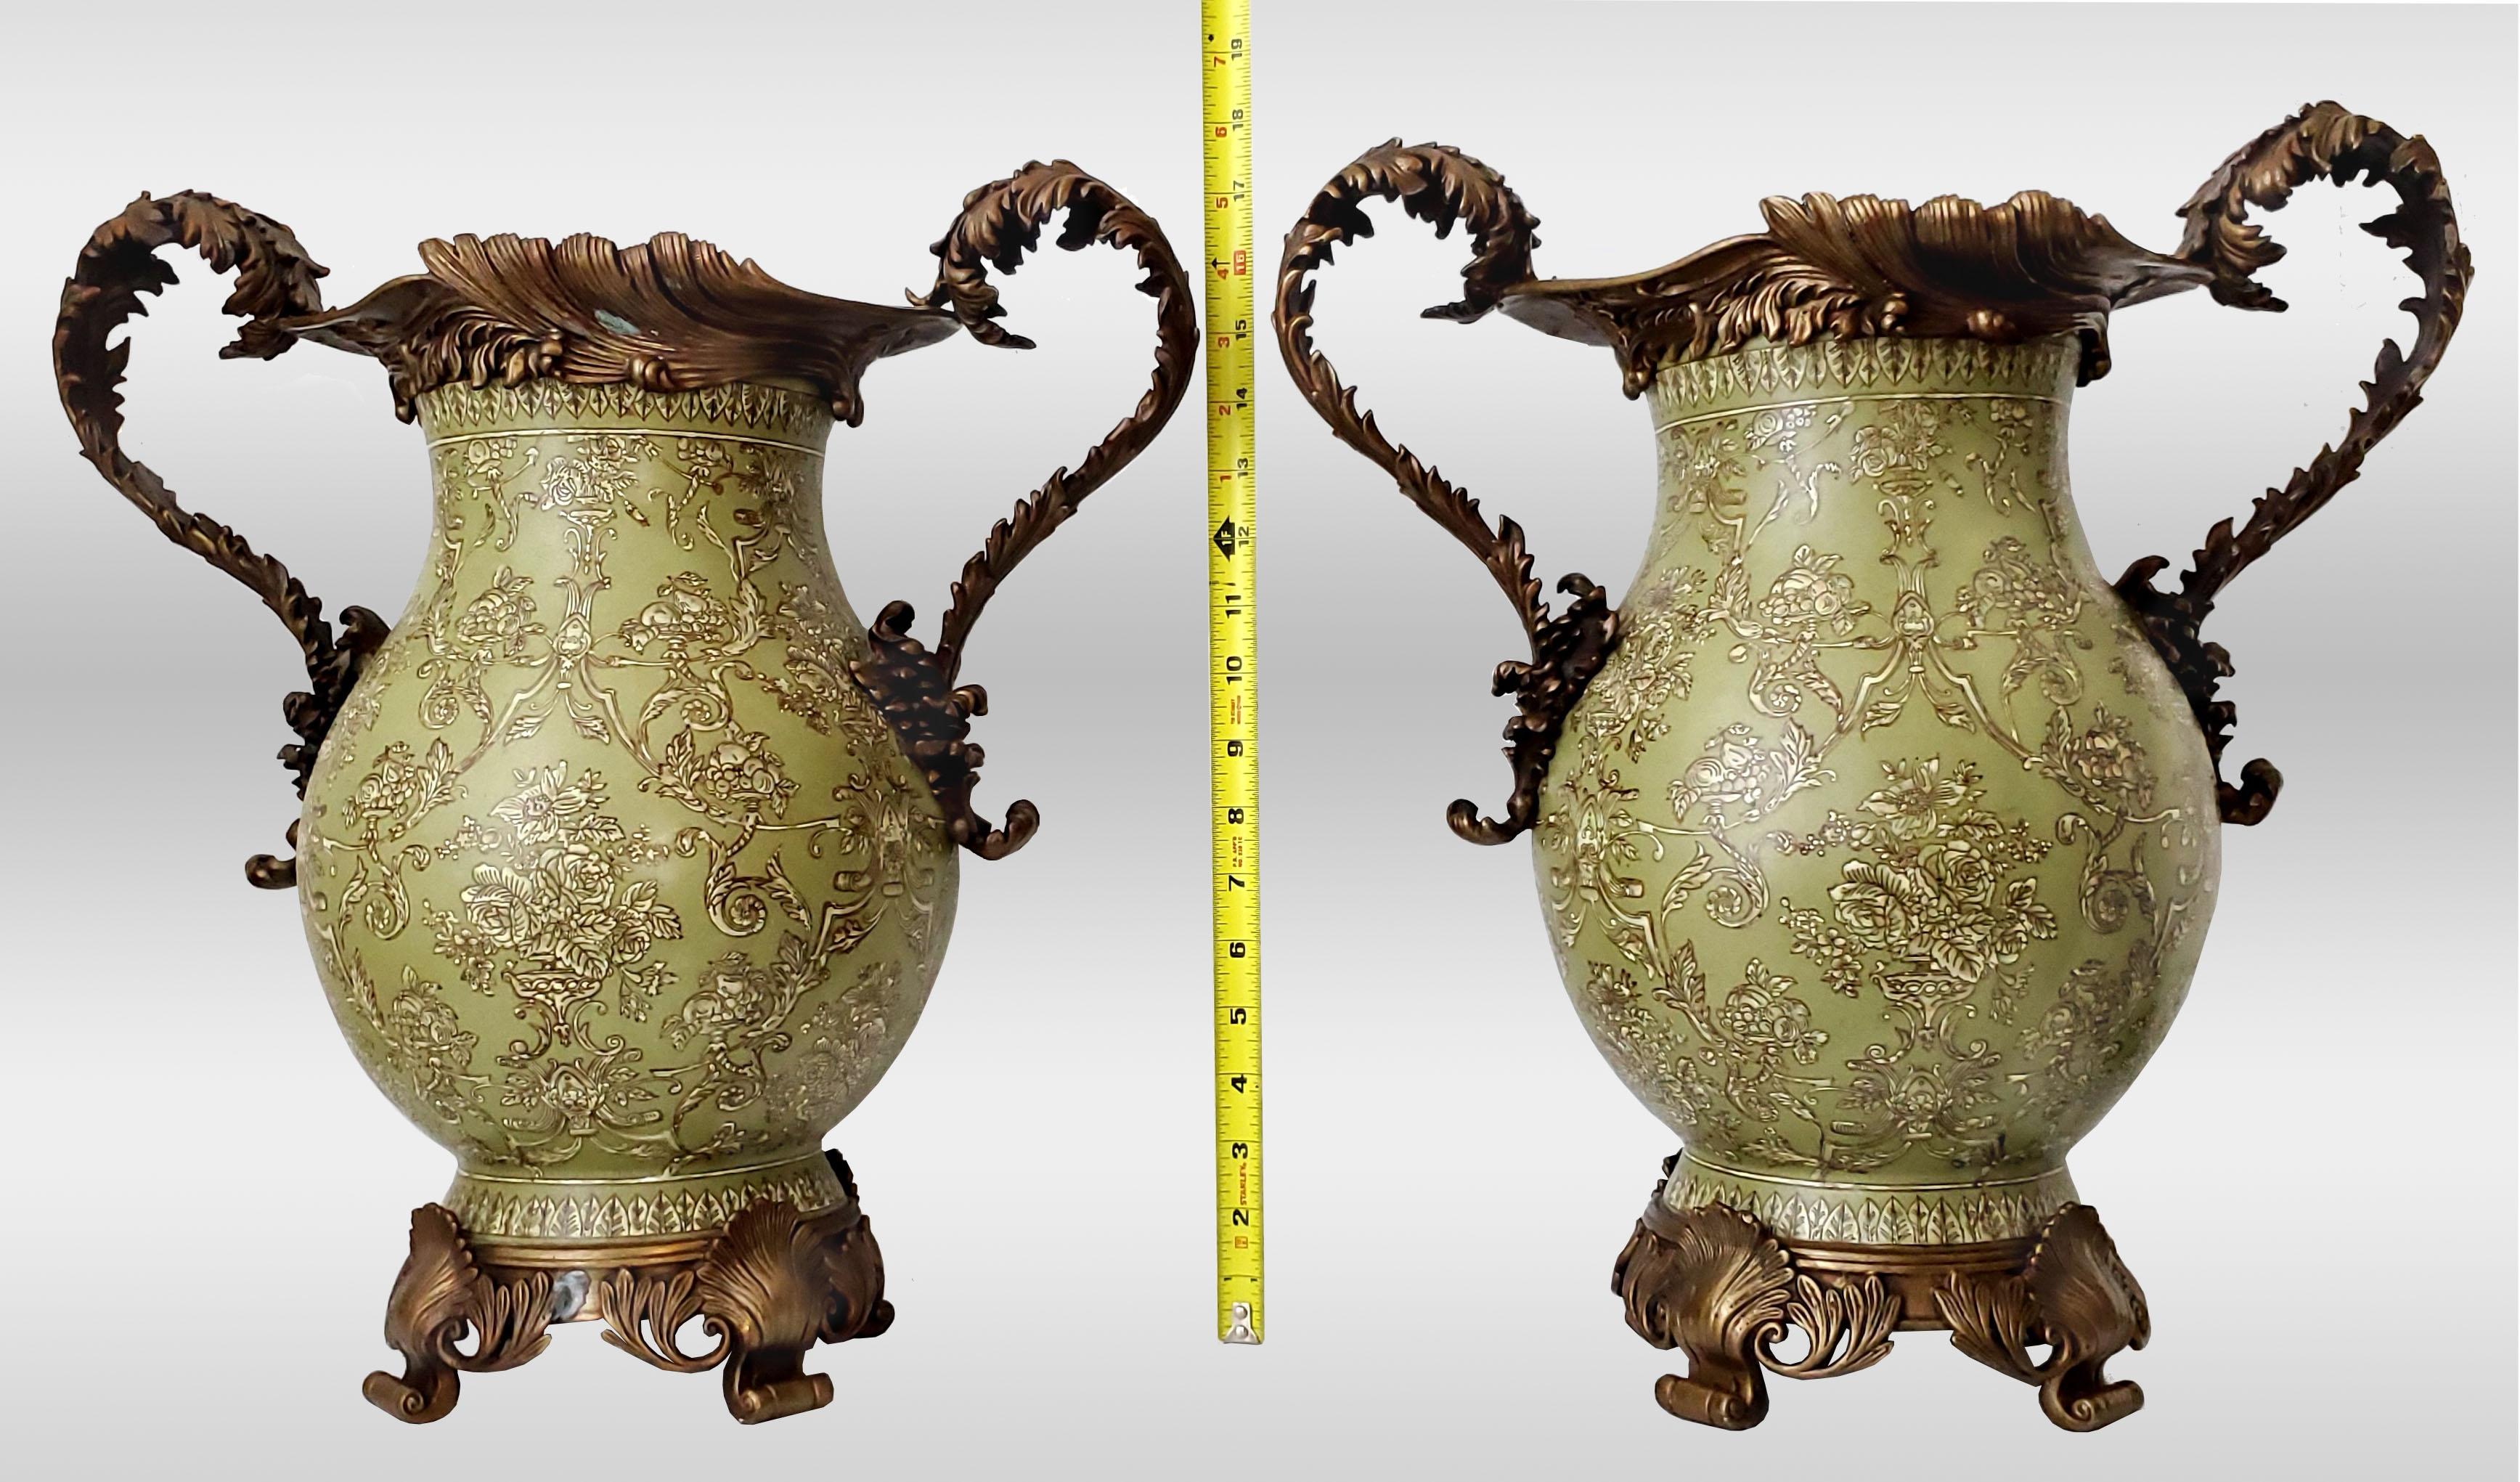 20th Century Louis XVI Style Ormolu and Chinese Porcelain Sage Green Urns or Vases - A Pair   For Sale